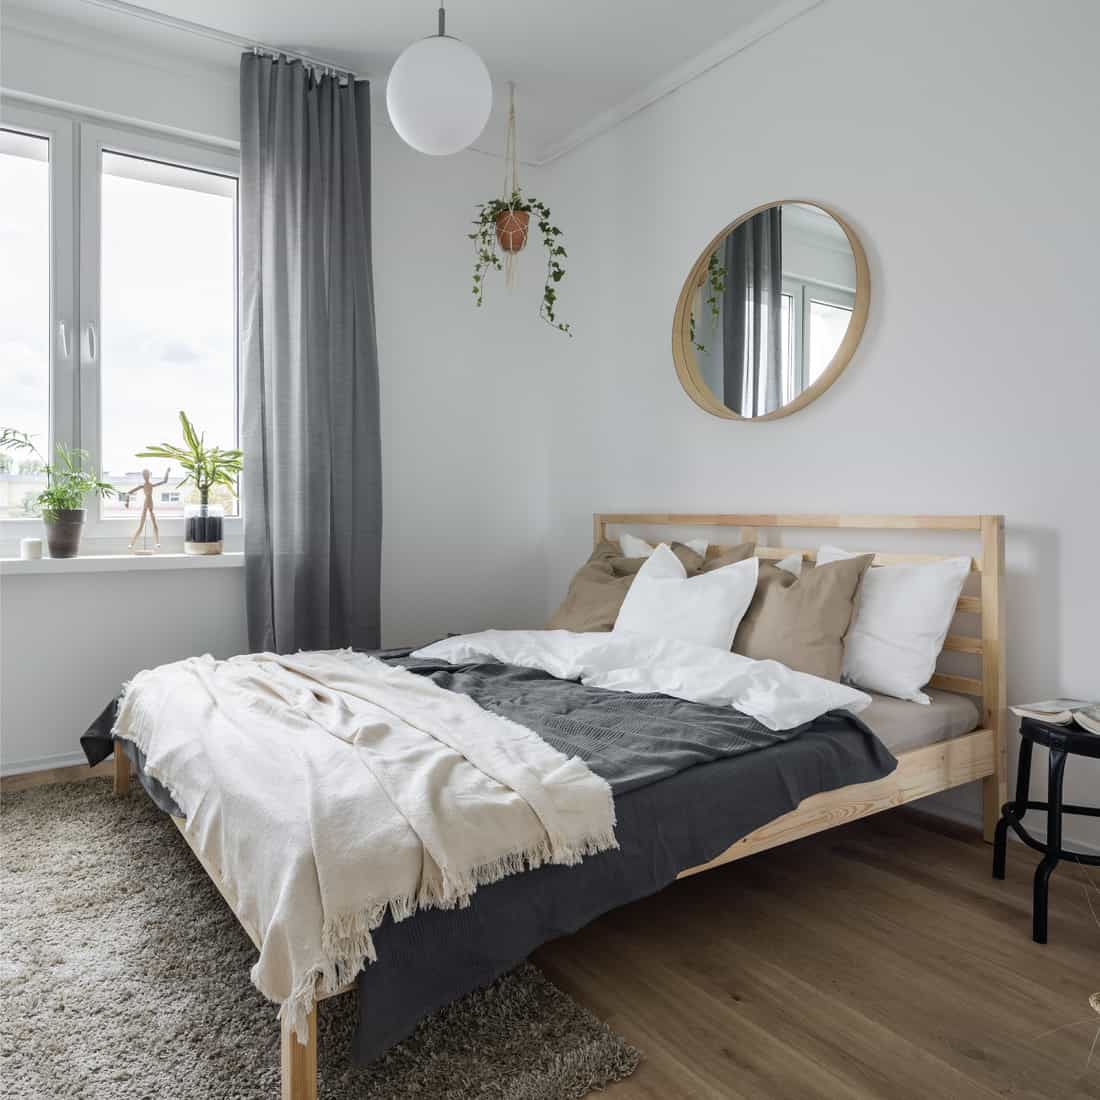 Bedroom interior with wooden bed, gray window curtains and mirror